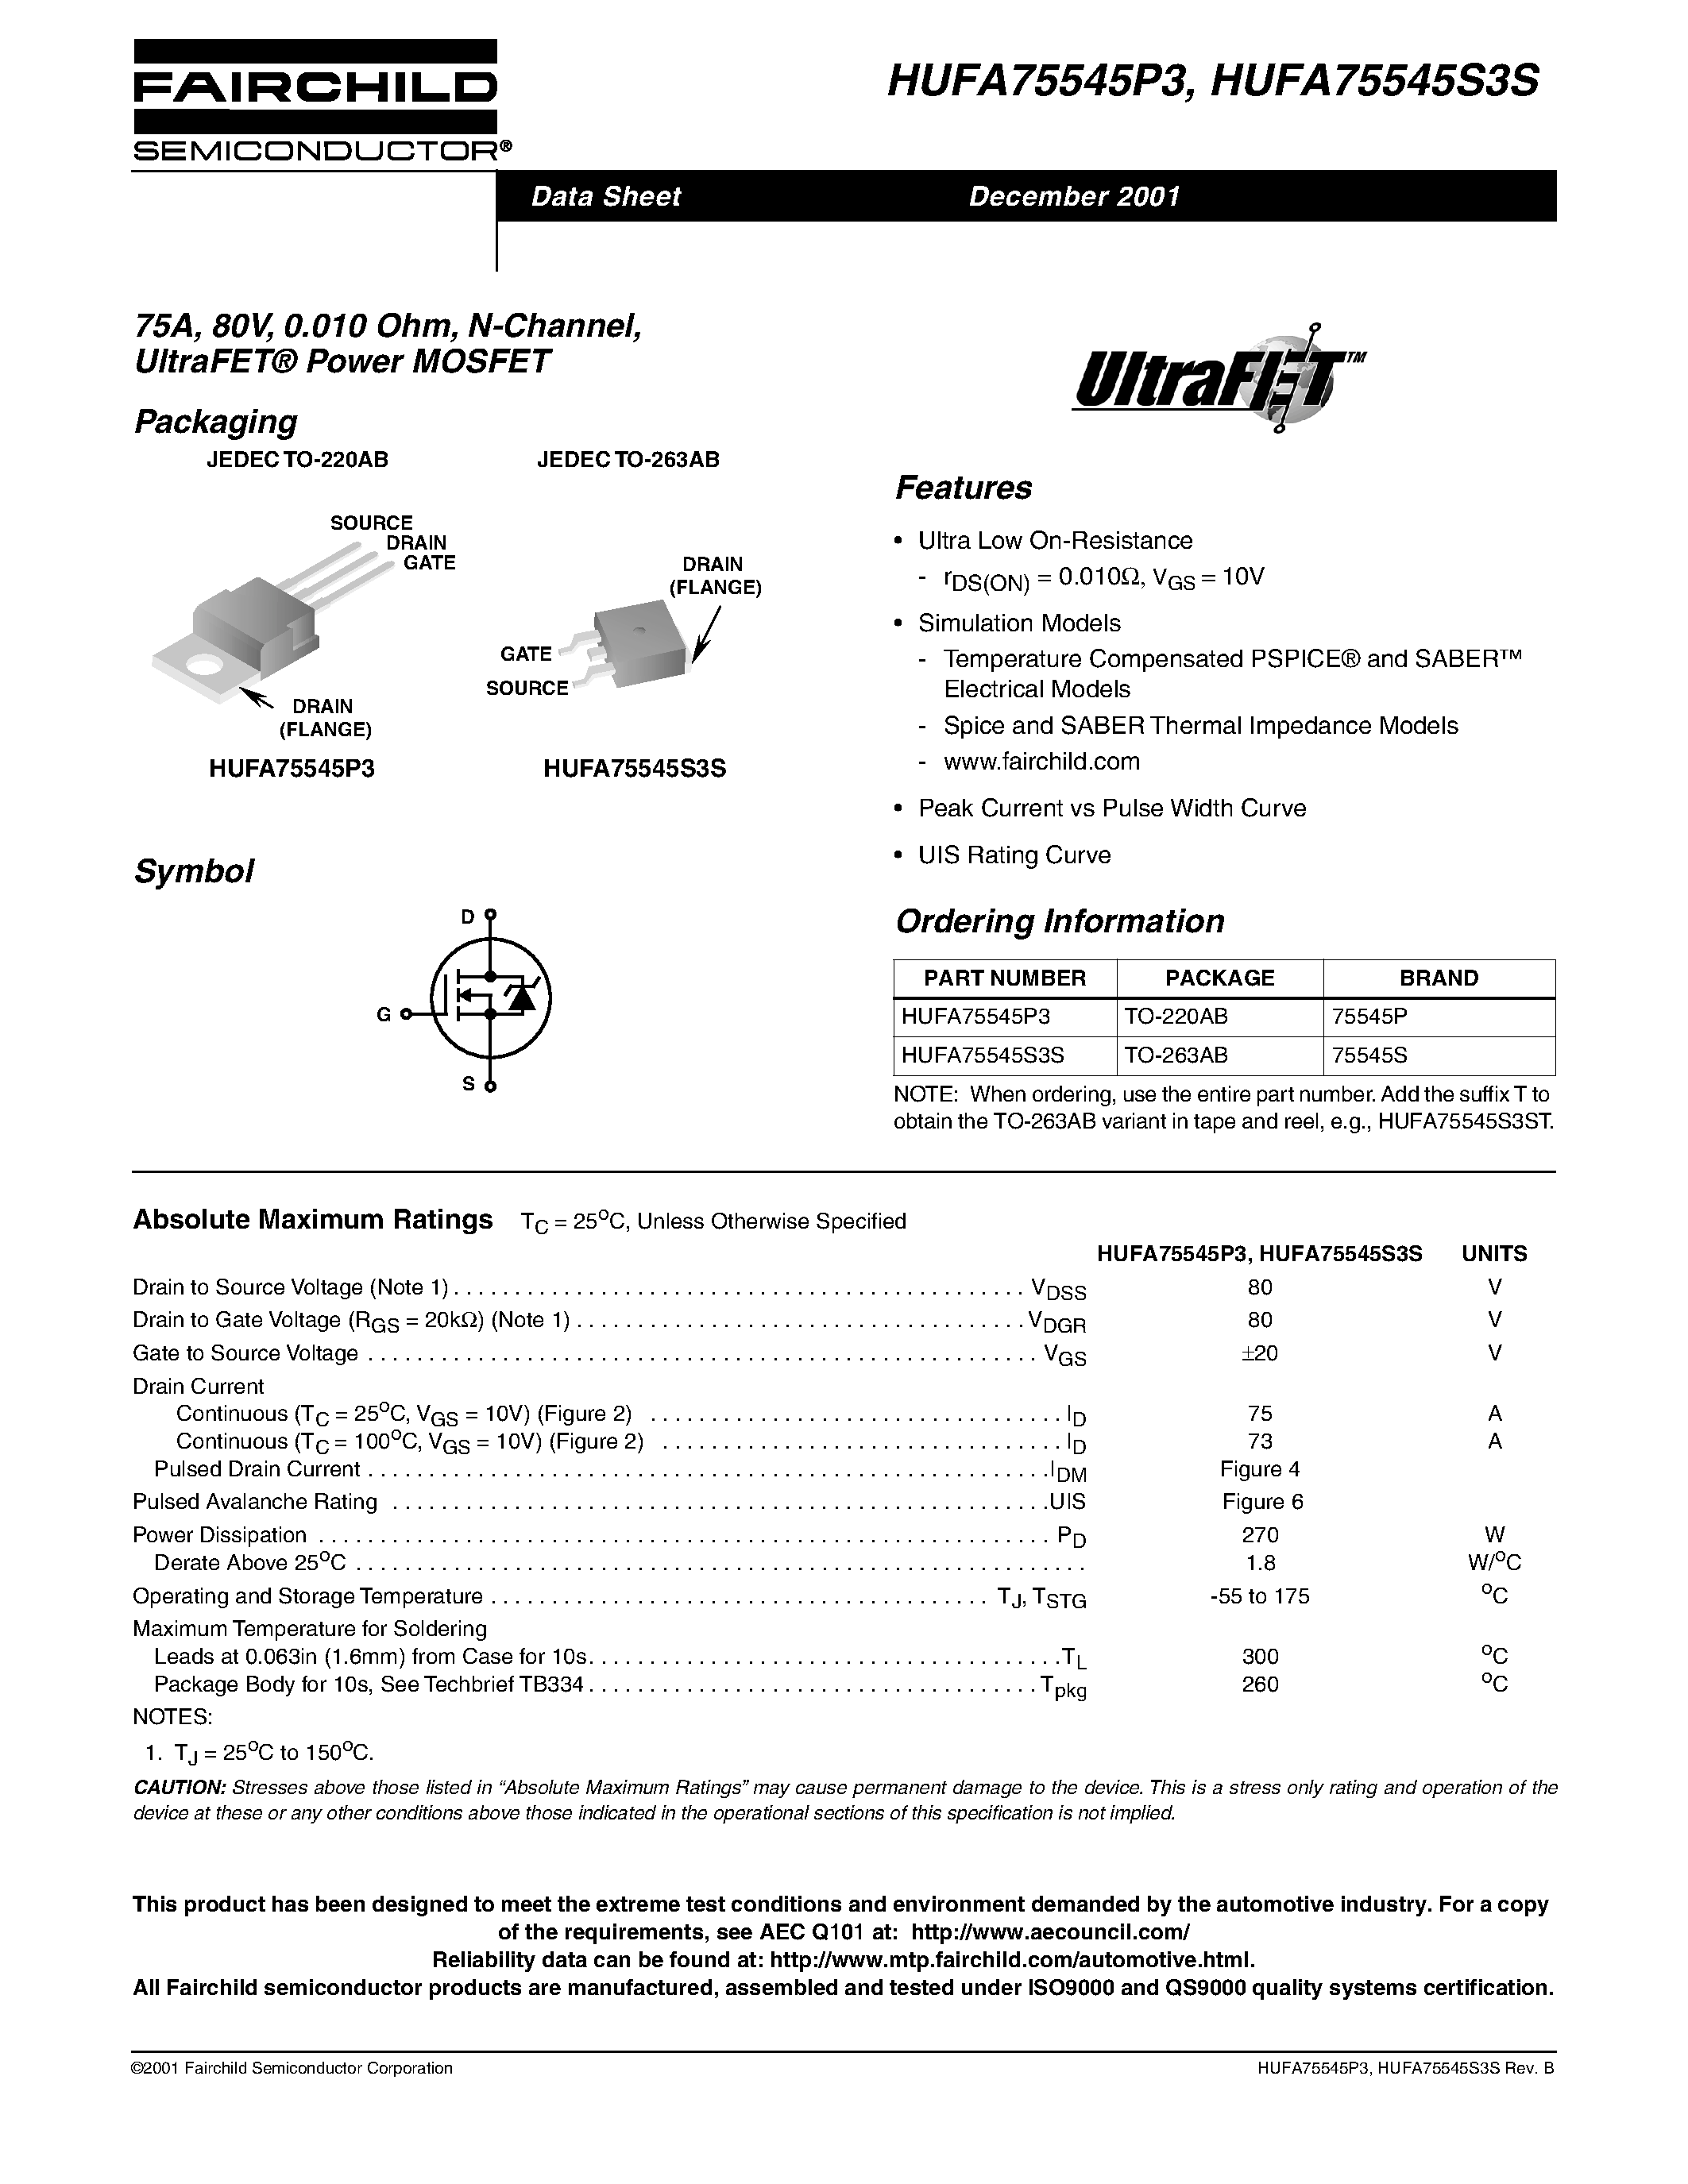 Datasheet HUFA75545S3S - 75A/ 80V/ 0.010 Ohm/ N-Channel/ UltraFET Power MOSFET page 1